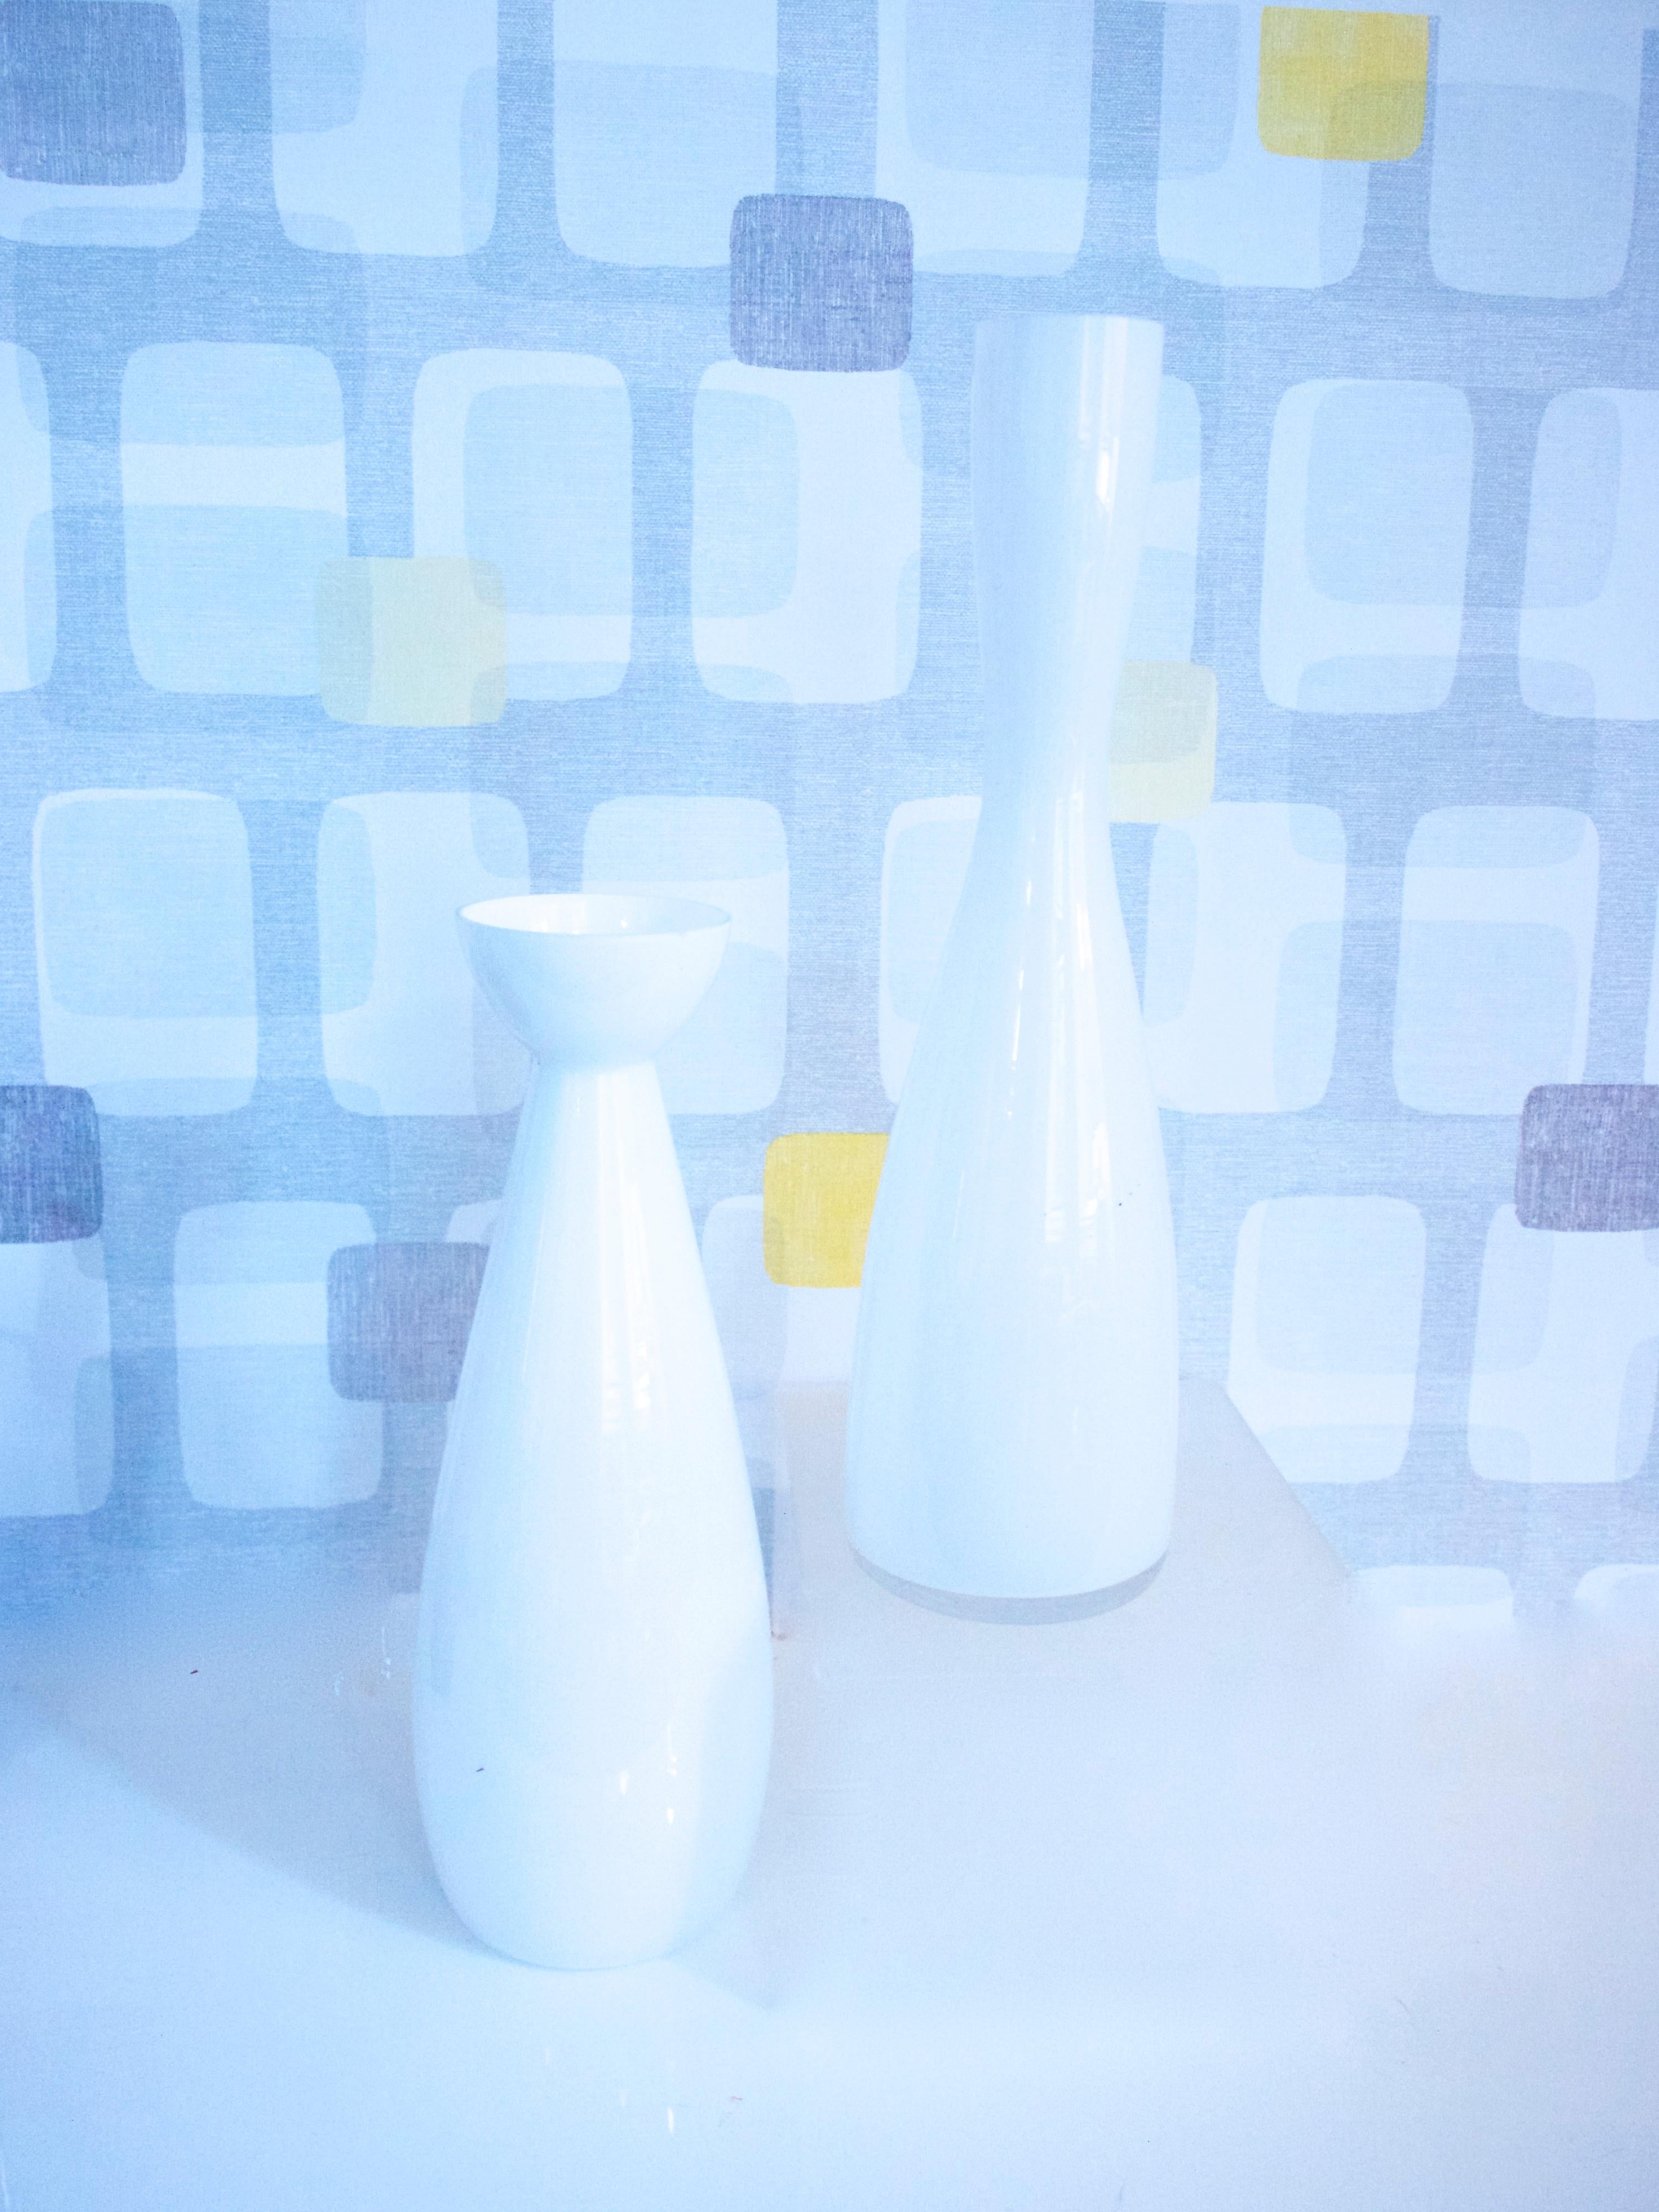 Modernist Scandinavian/Murano Space Age White Glass Vases from Late 1950s-1960s For Sale 2